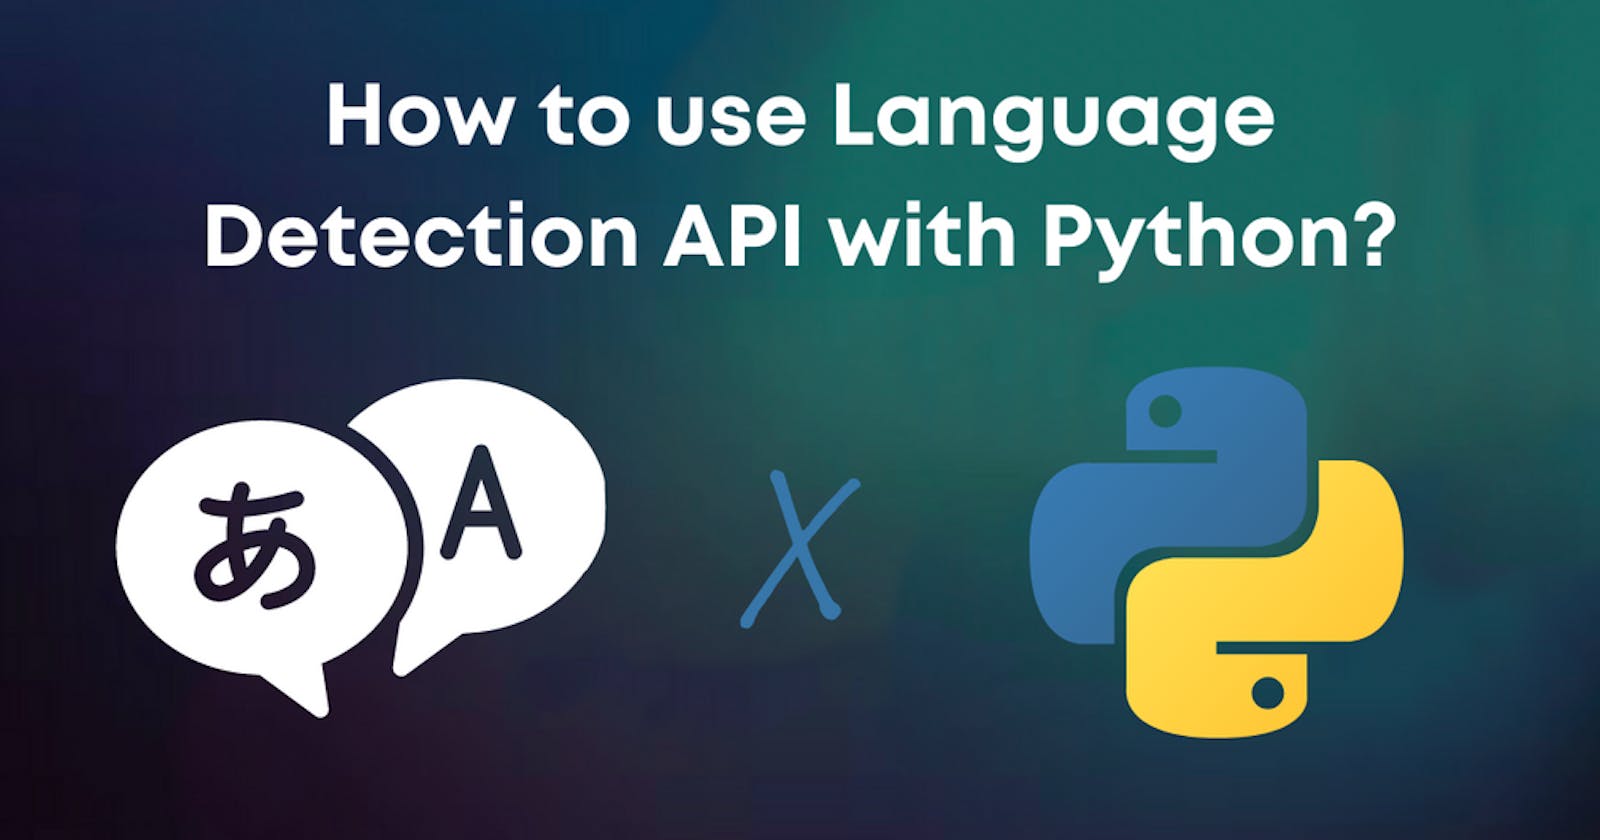 How to use Language Detection API with Python in 5 minutes?